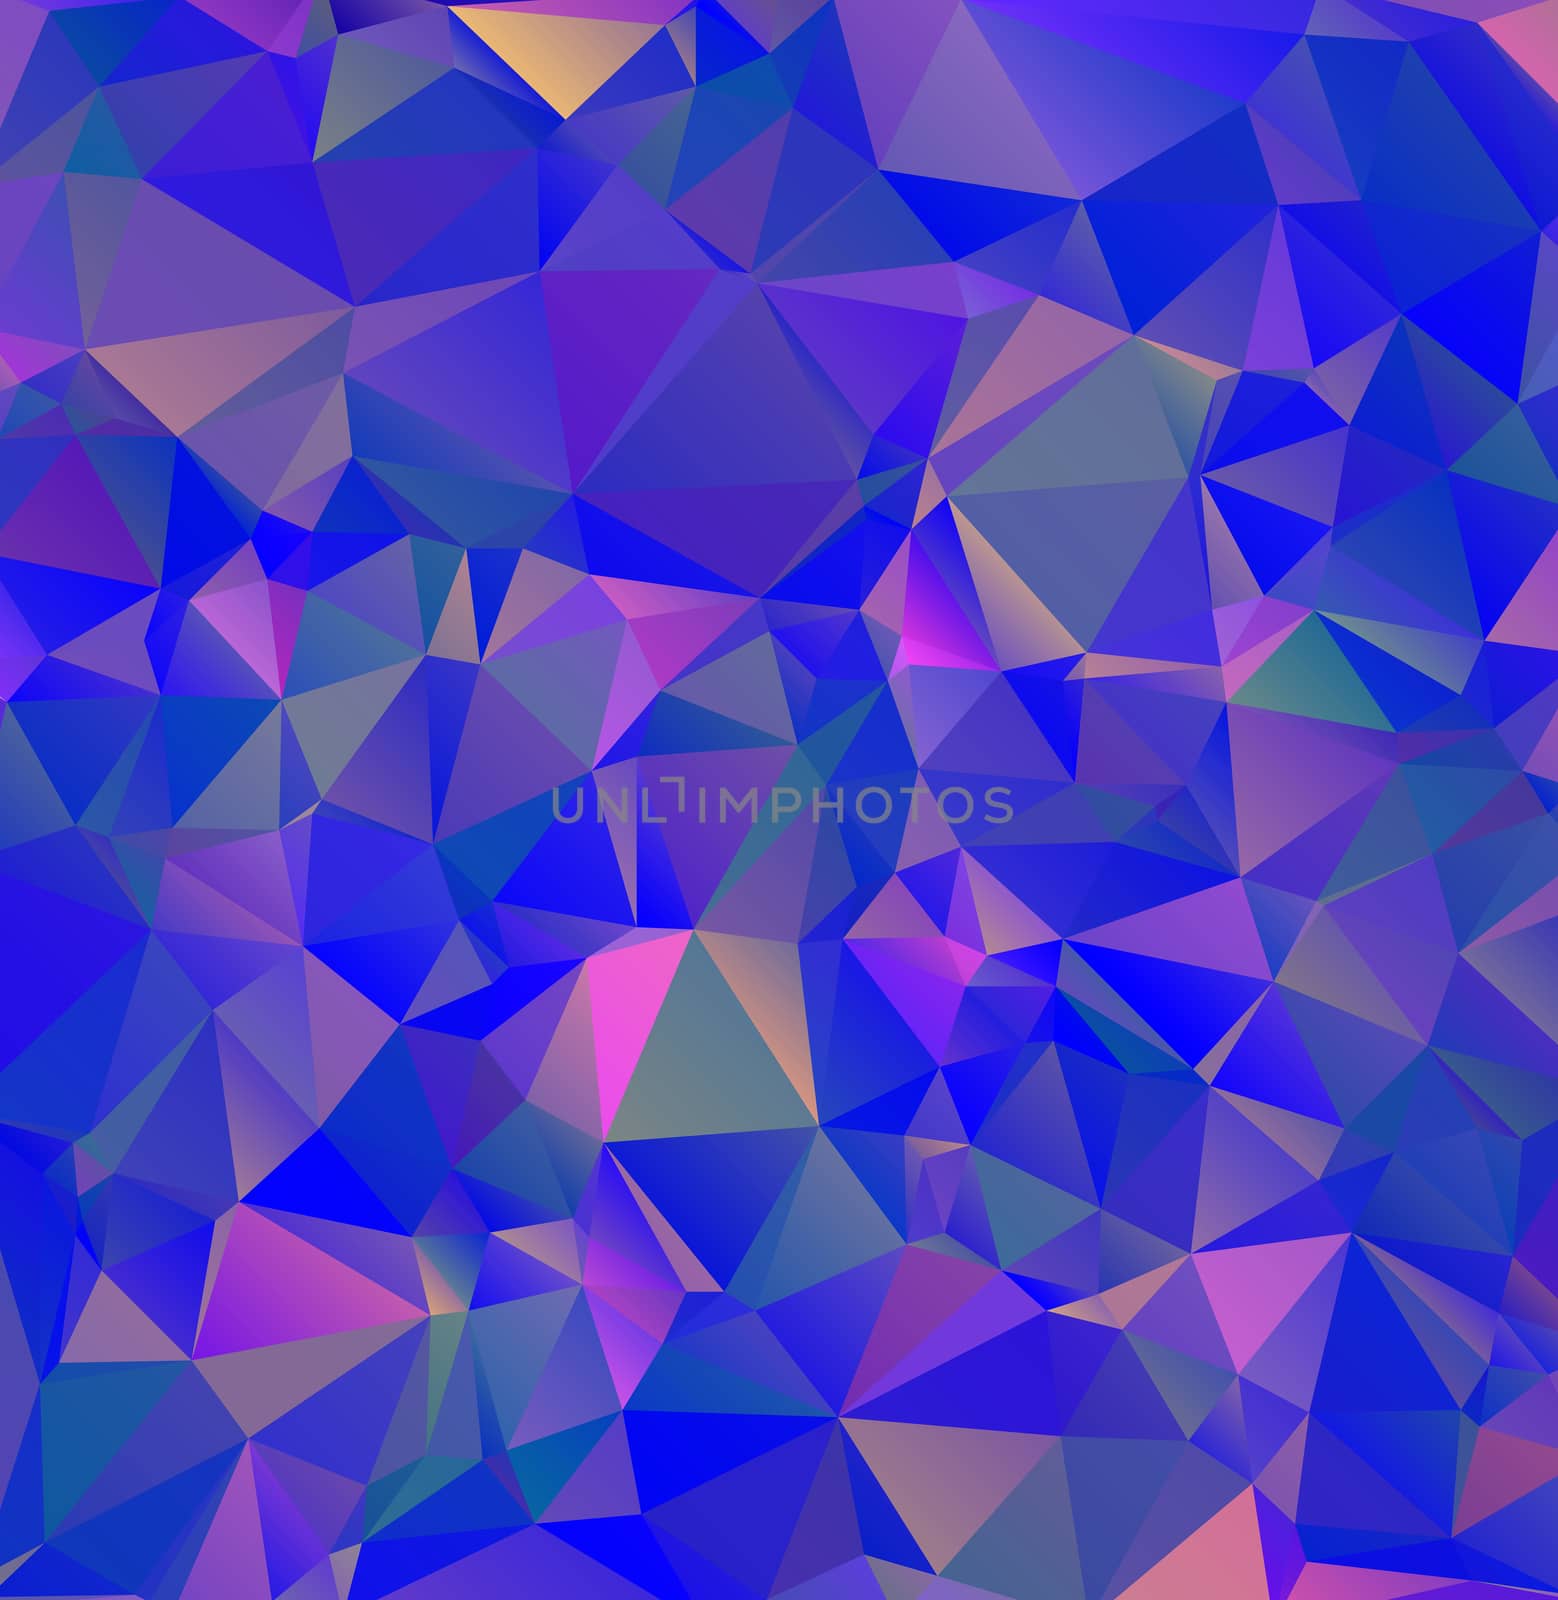 low poly style illustration,abstract rumpled triangular background